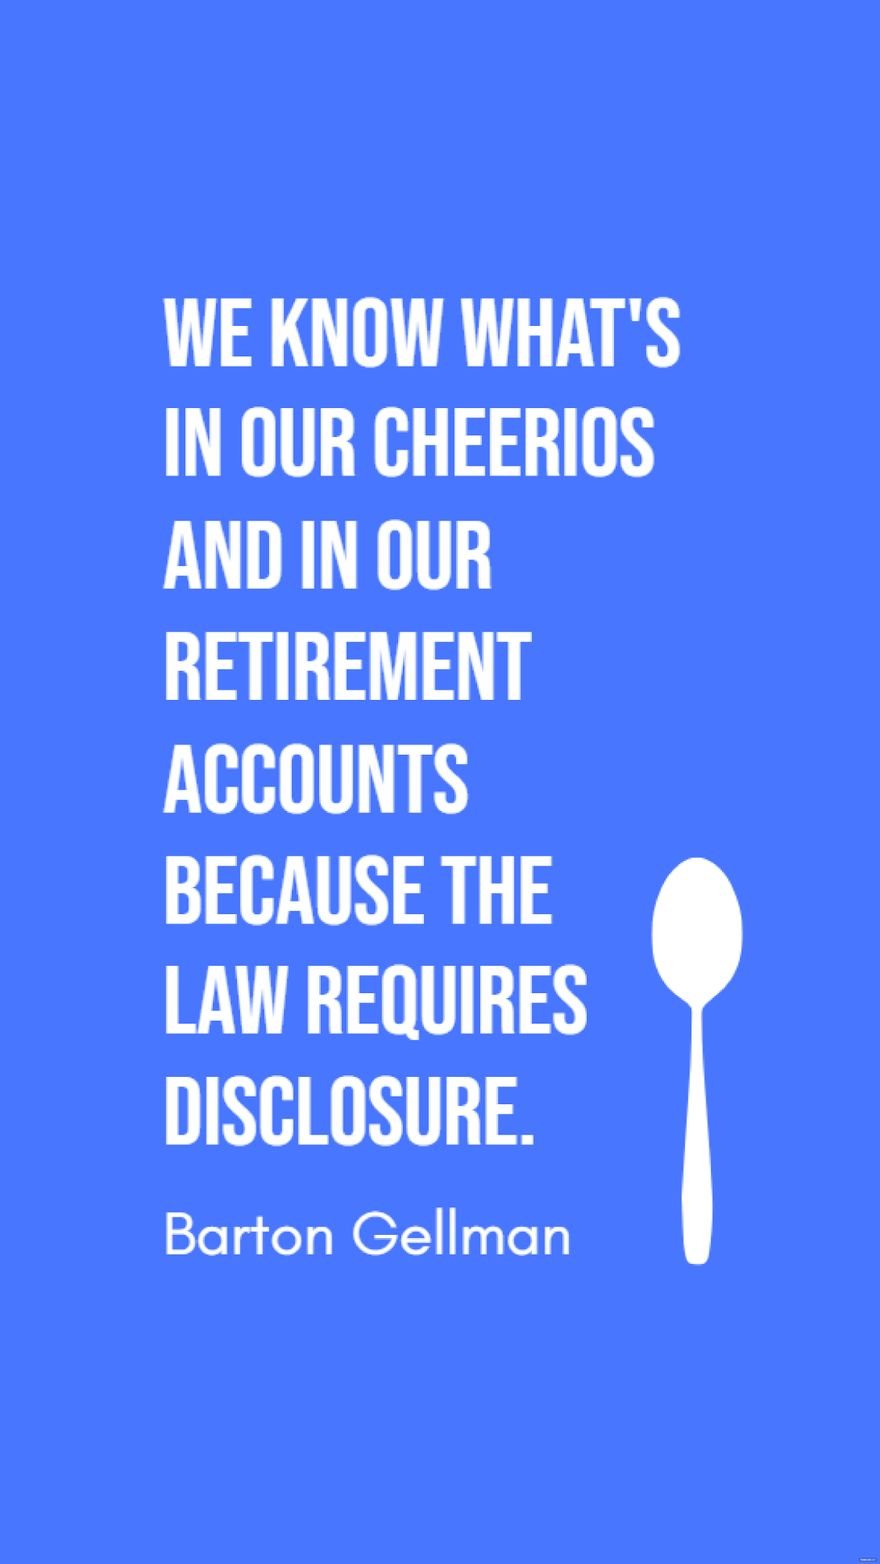 Free Barton Gellman - We know what's in our Cheerios and in our retirement accounts because the law requires disclosure.